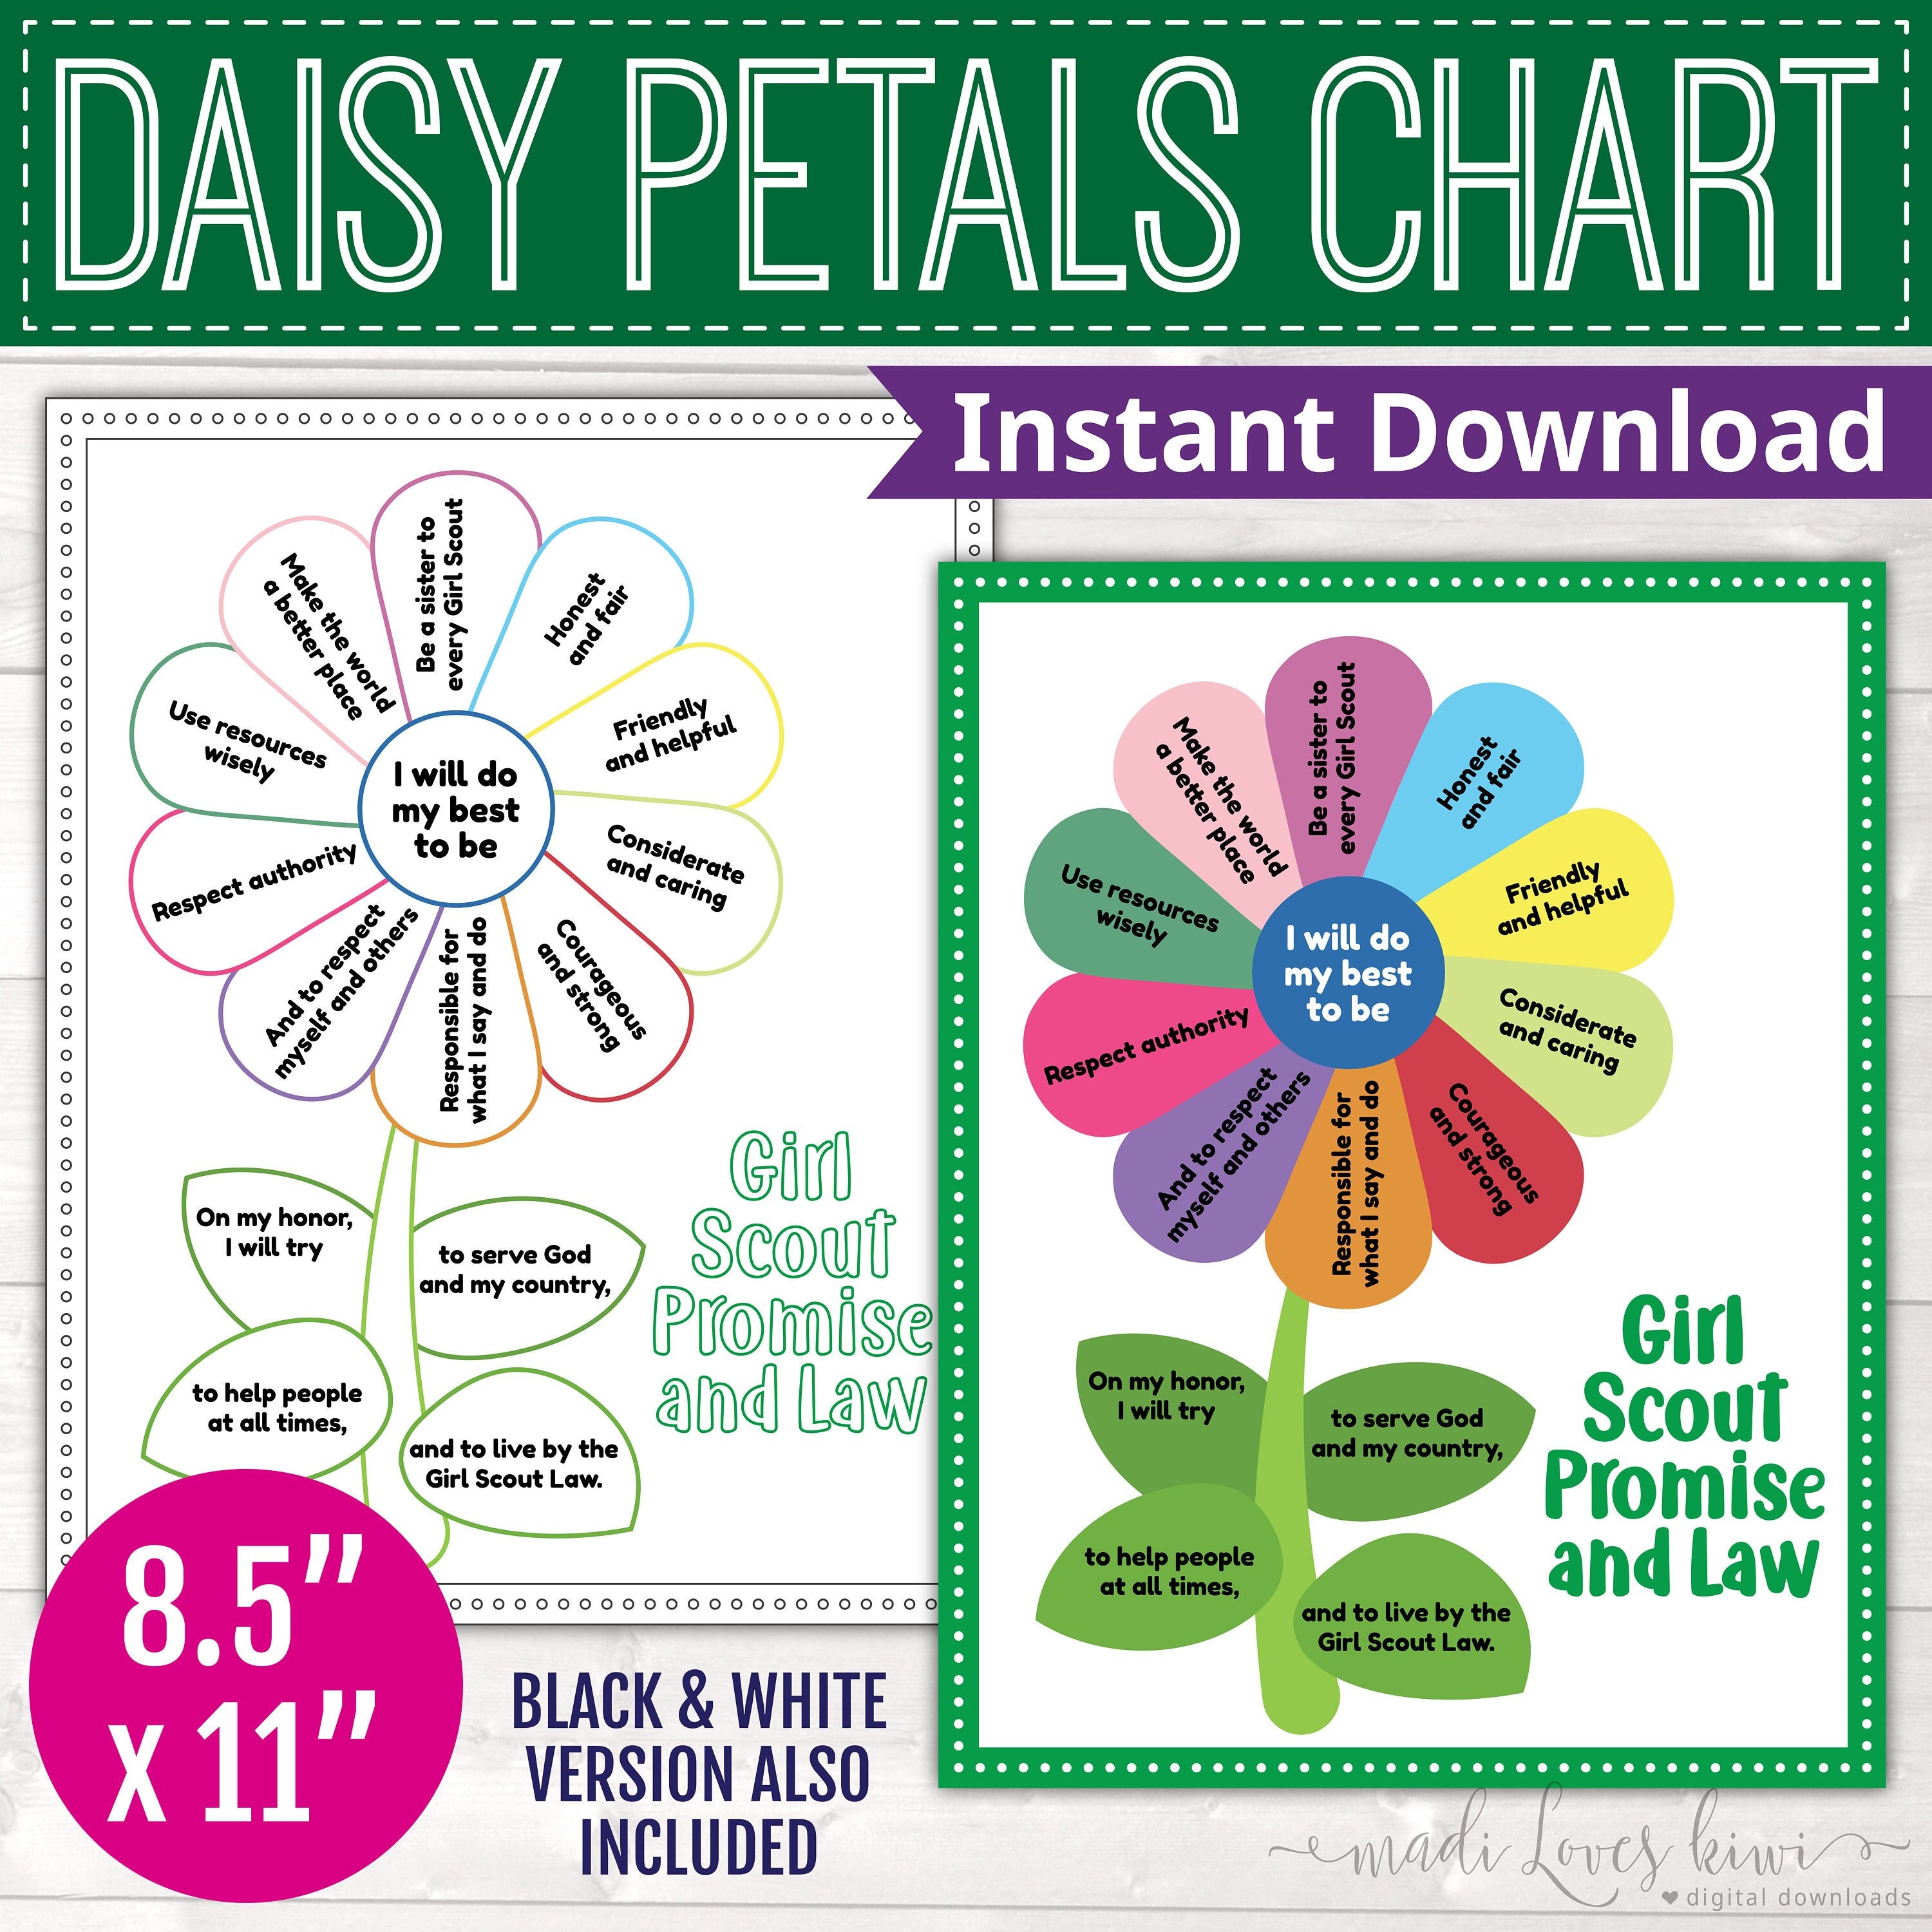 girl-scout-promise-and-law-daisy-flower-printable-lupon-gov-ph